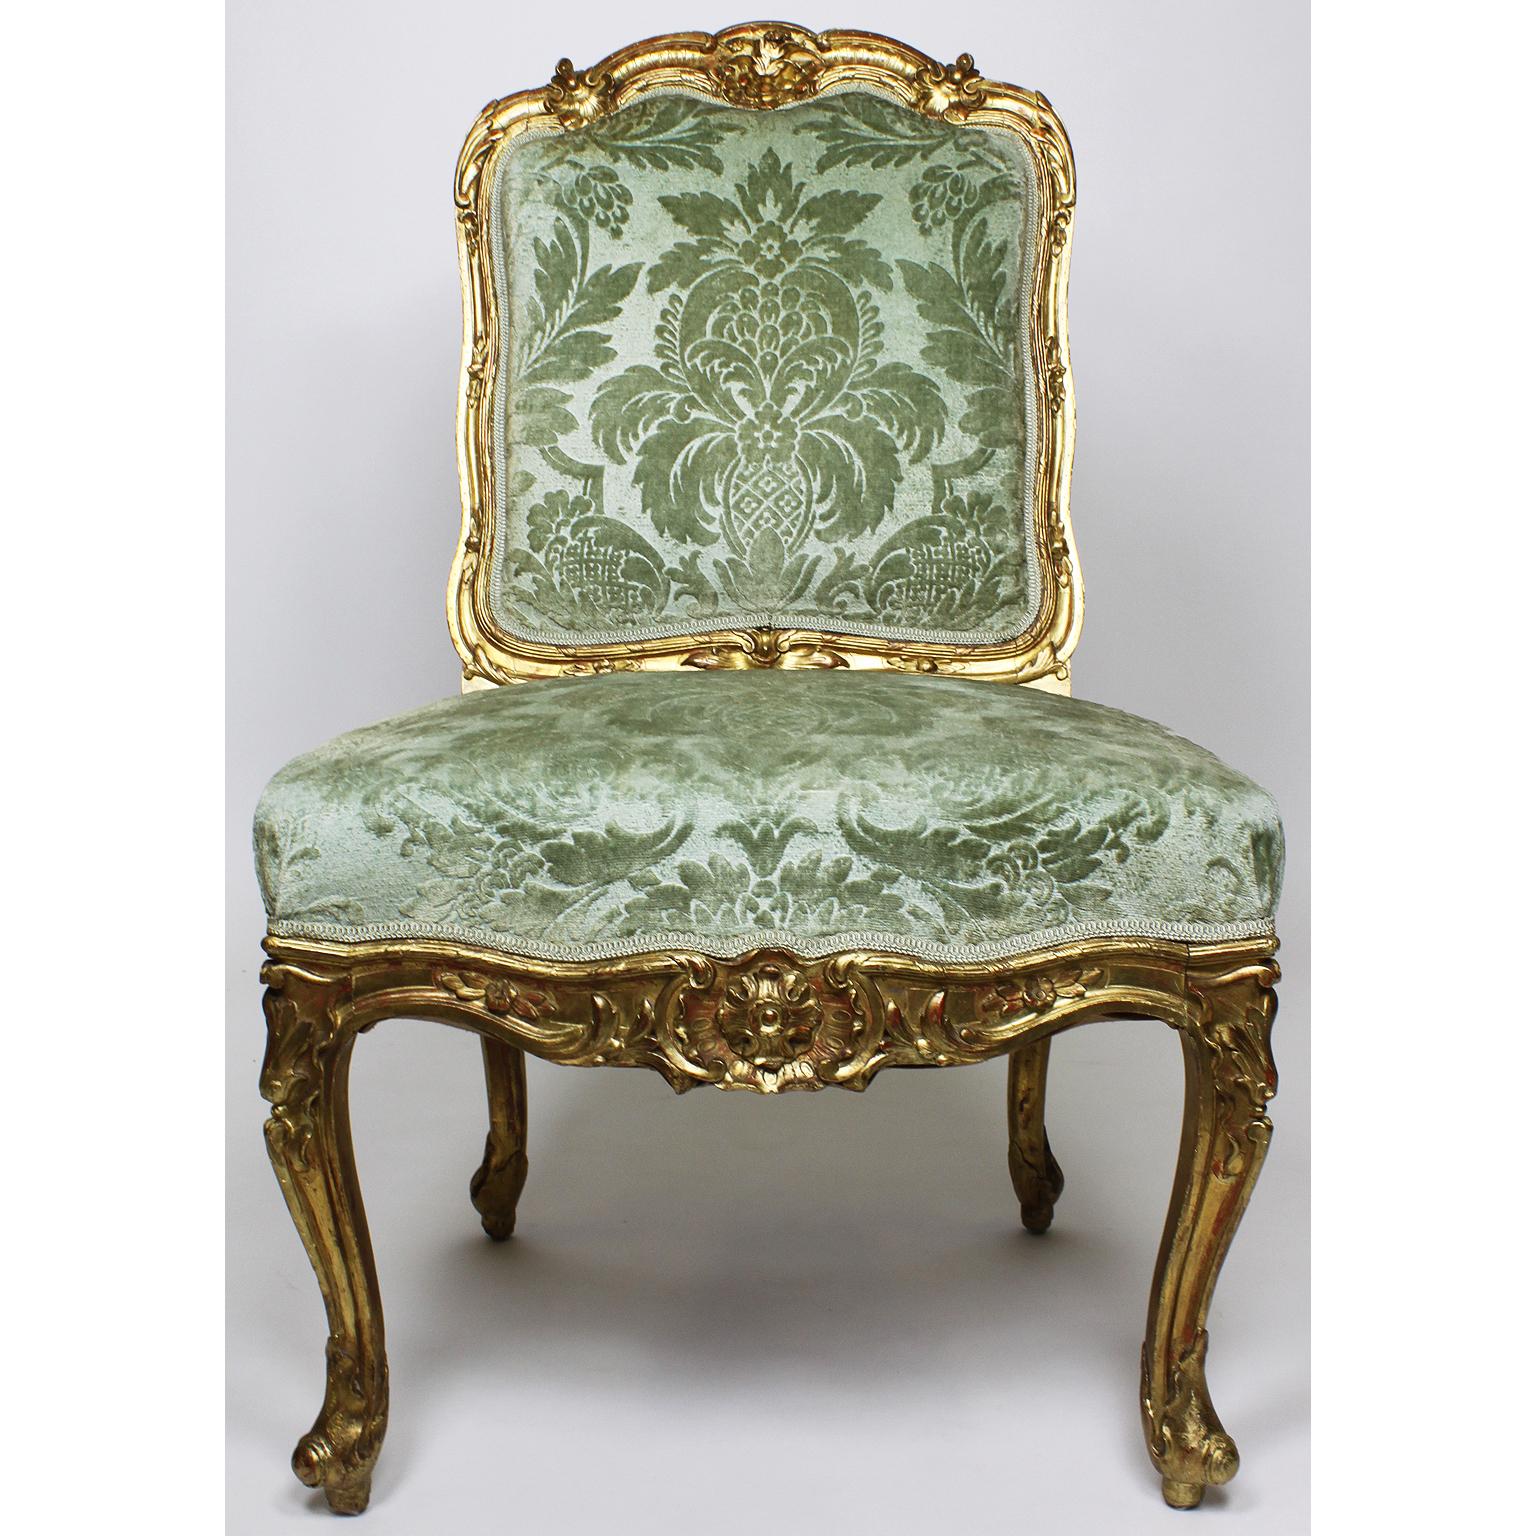 A fine set of four French 19th century Louis XV Rococo style giltwood carved chaises side-chairs, the arched upholstered panelled backs with foliate scroll cresting and similar borders, raised on flower heads decorated cabriolet legs ending in